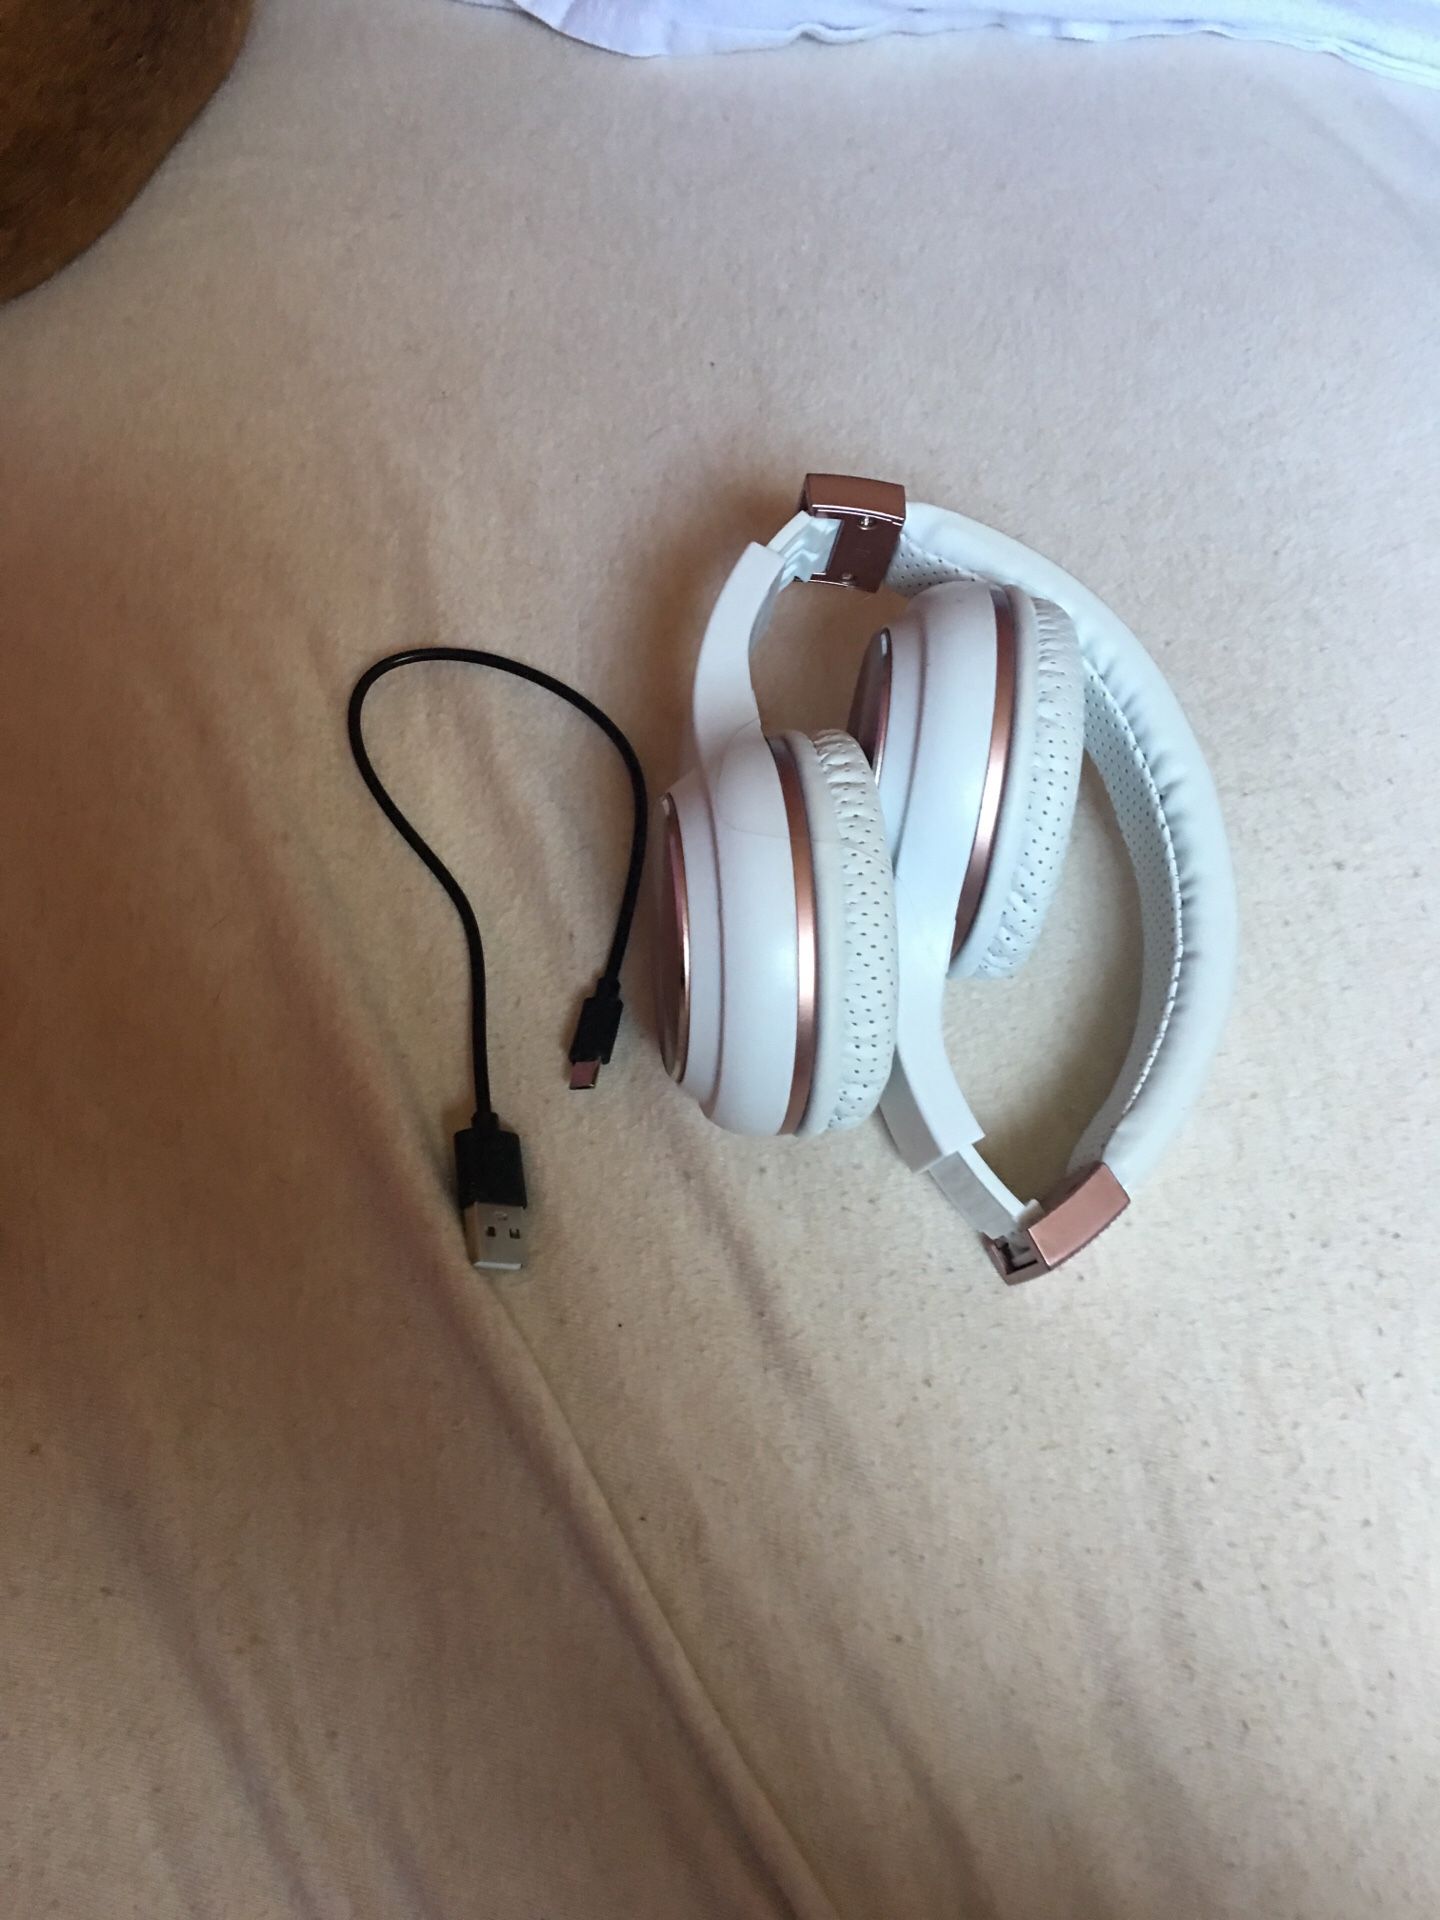 Bluetooth headphones with charger